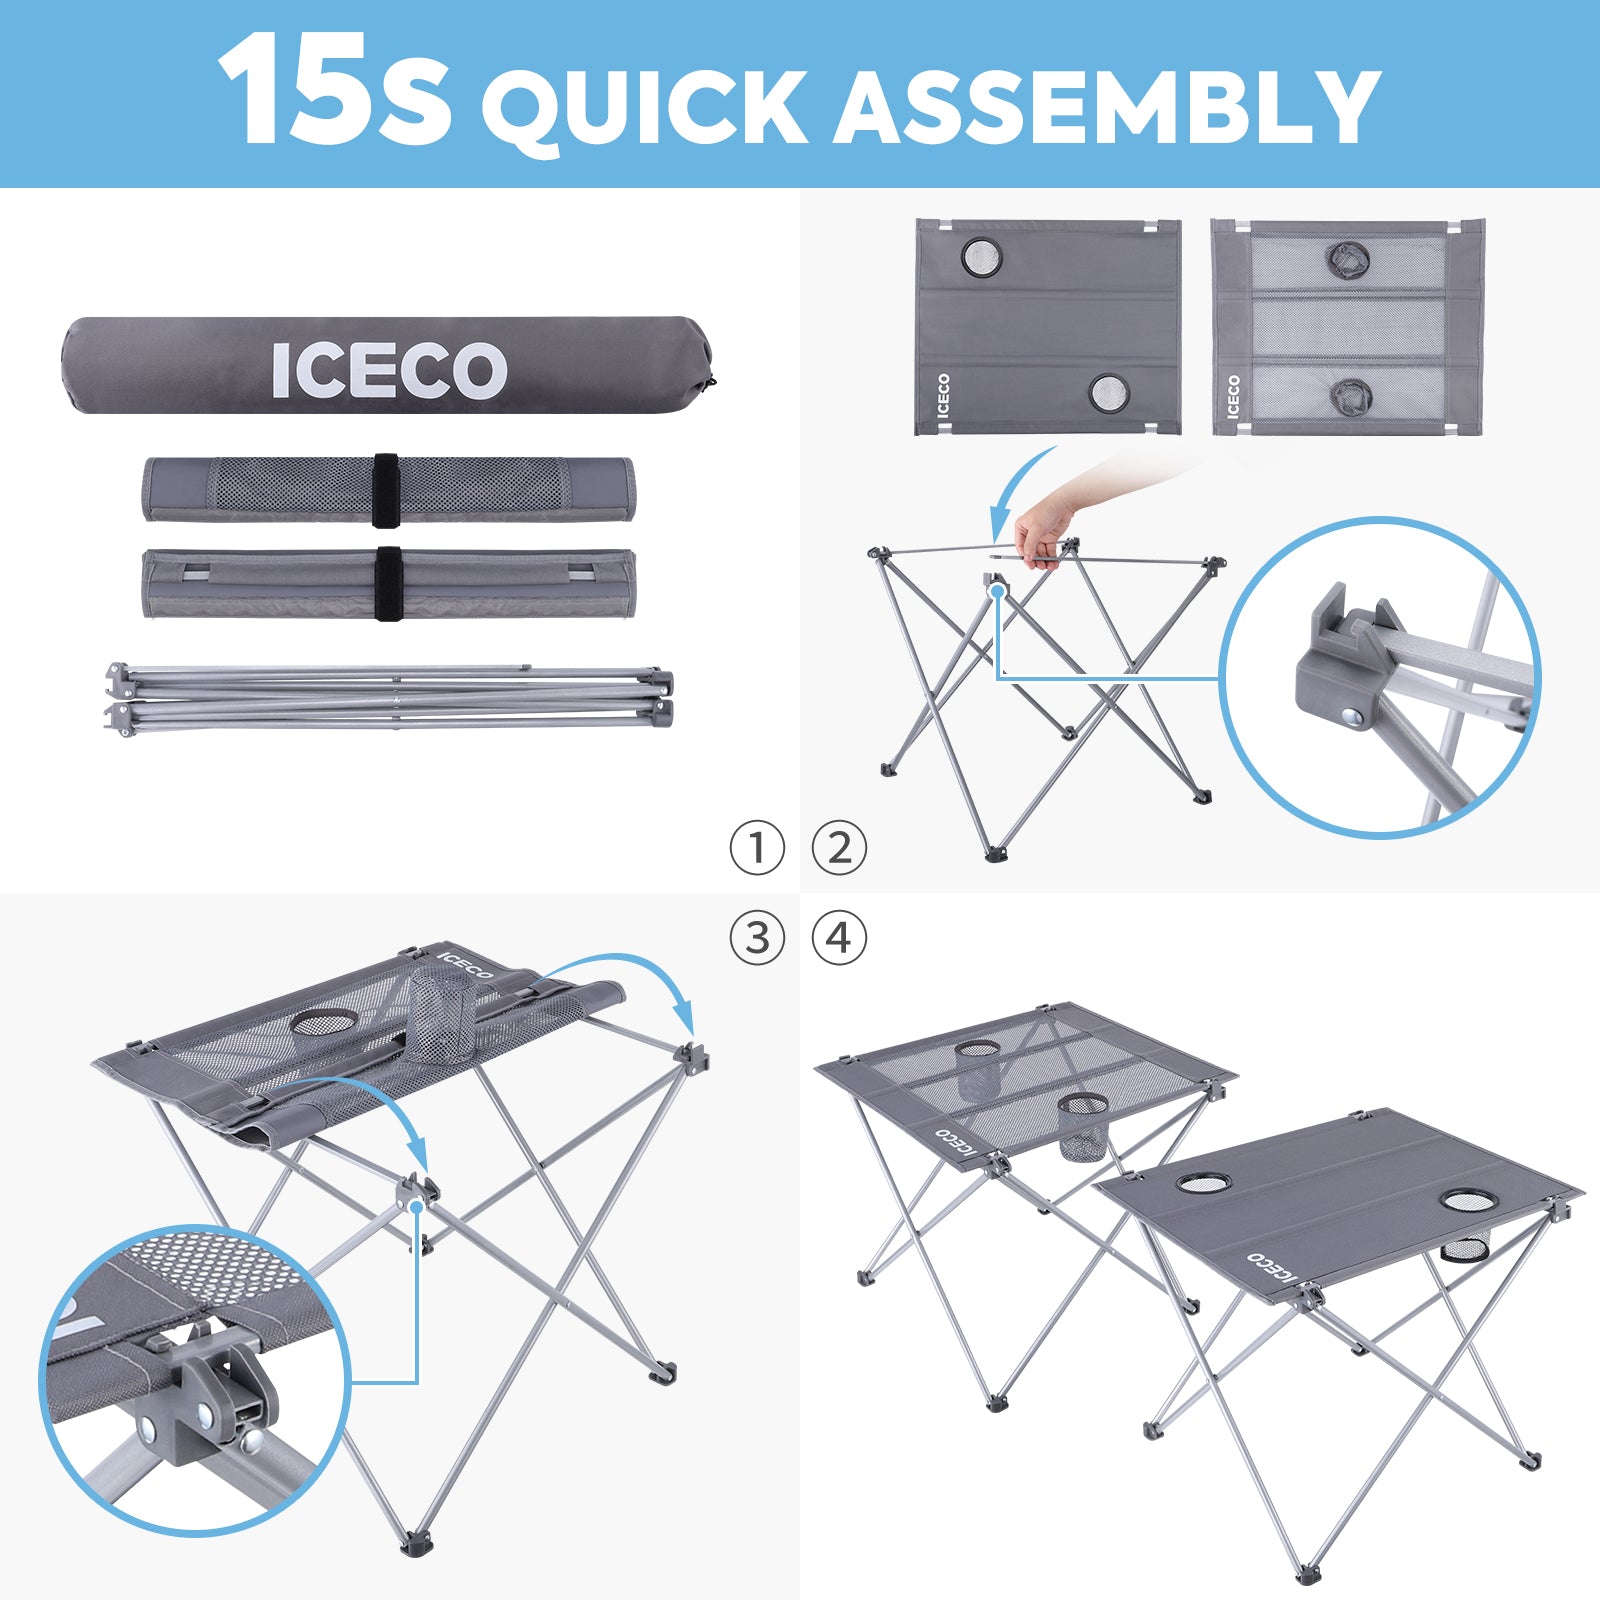 New! Portable Folding Camping Table | ICECO-Camping Chair-www.icecofreezer.com